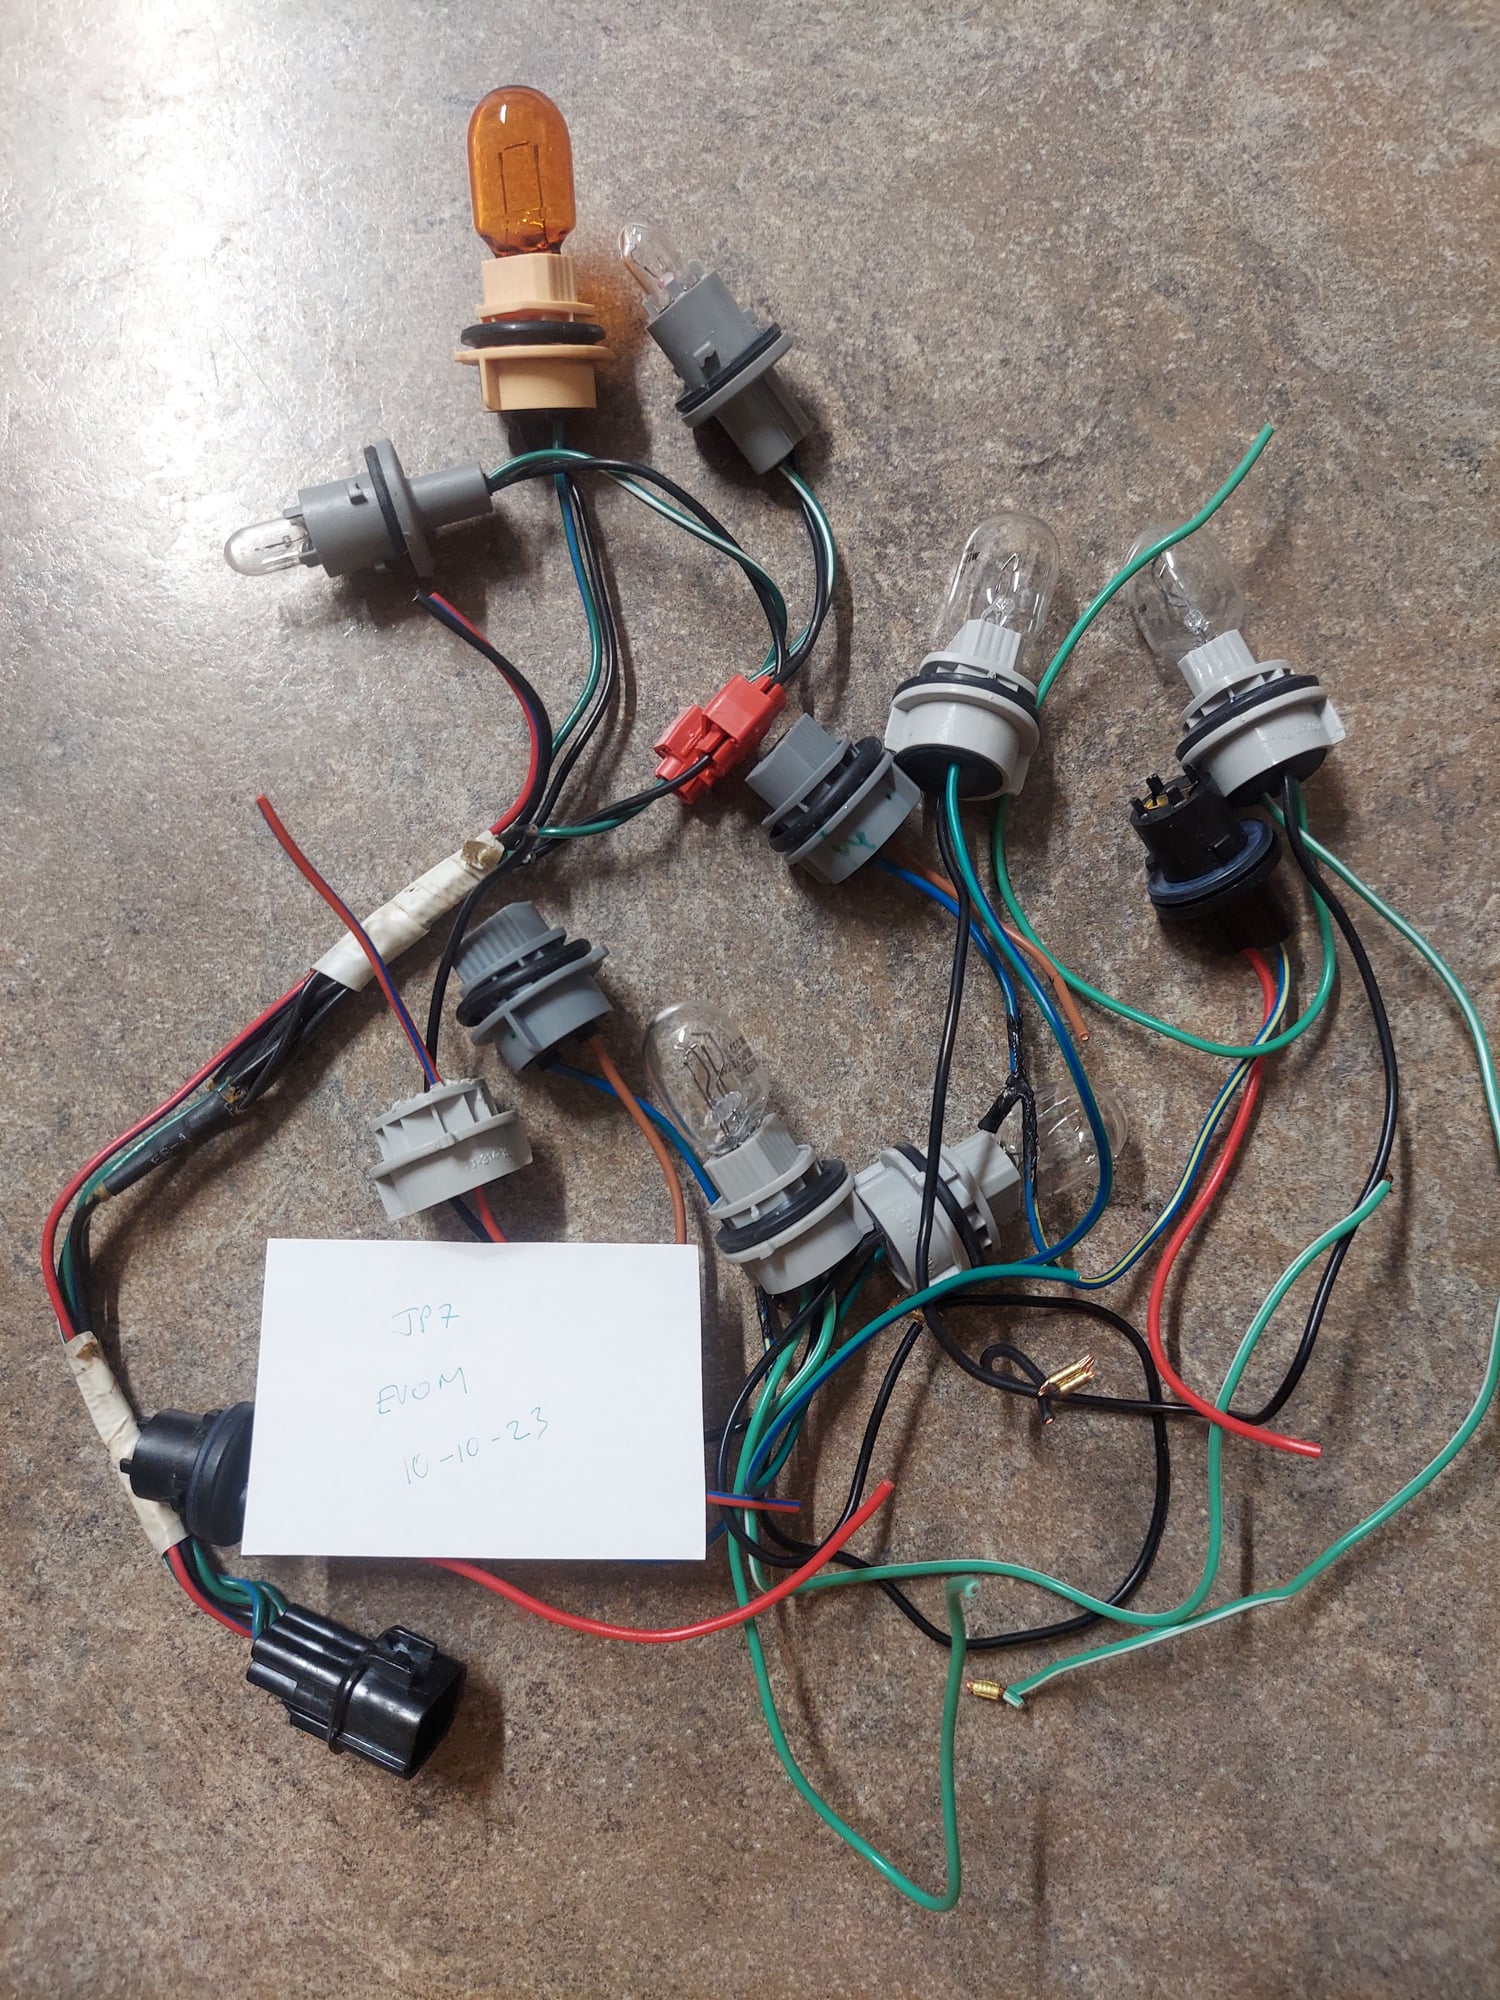 Lights - Evo 7/8/9 tail light harness wiring parts / sockets / bulbs - Used - South Chicago Suburbs, IL 60475, United States